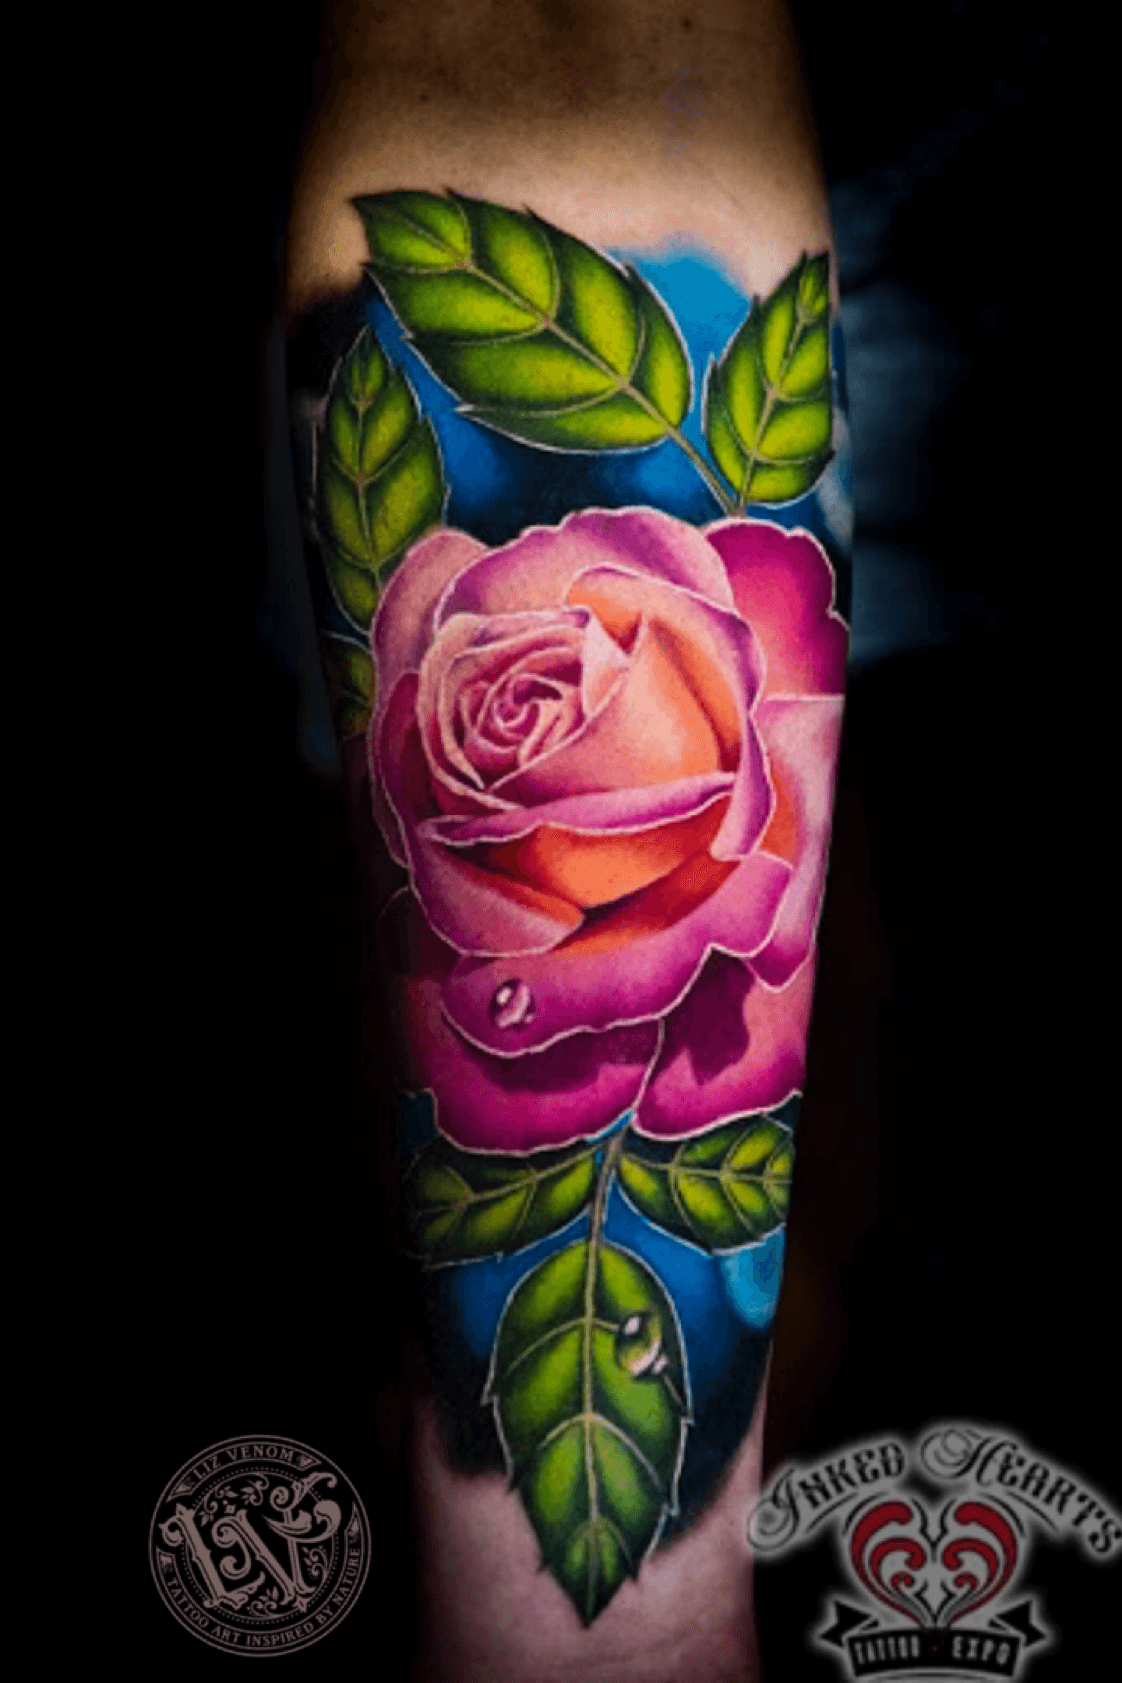 lv, tattoo and rose - image #6179096 on